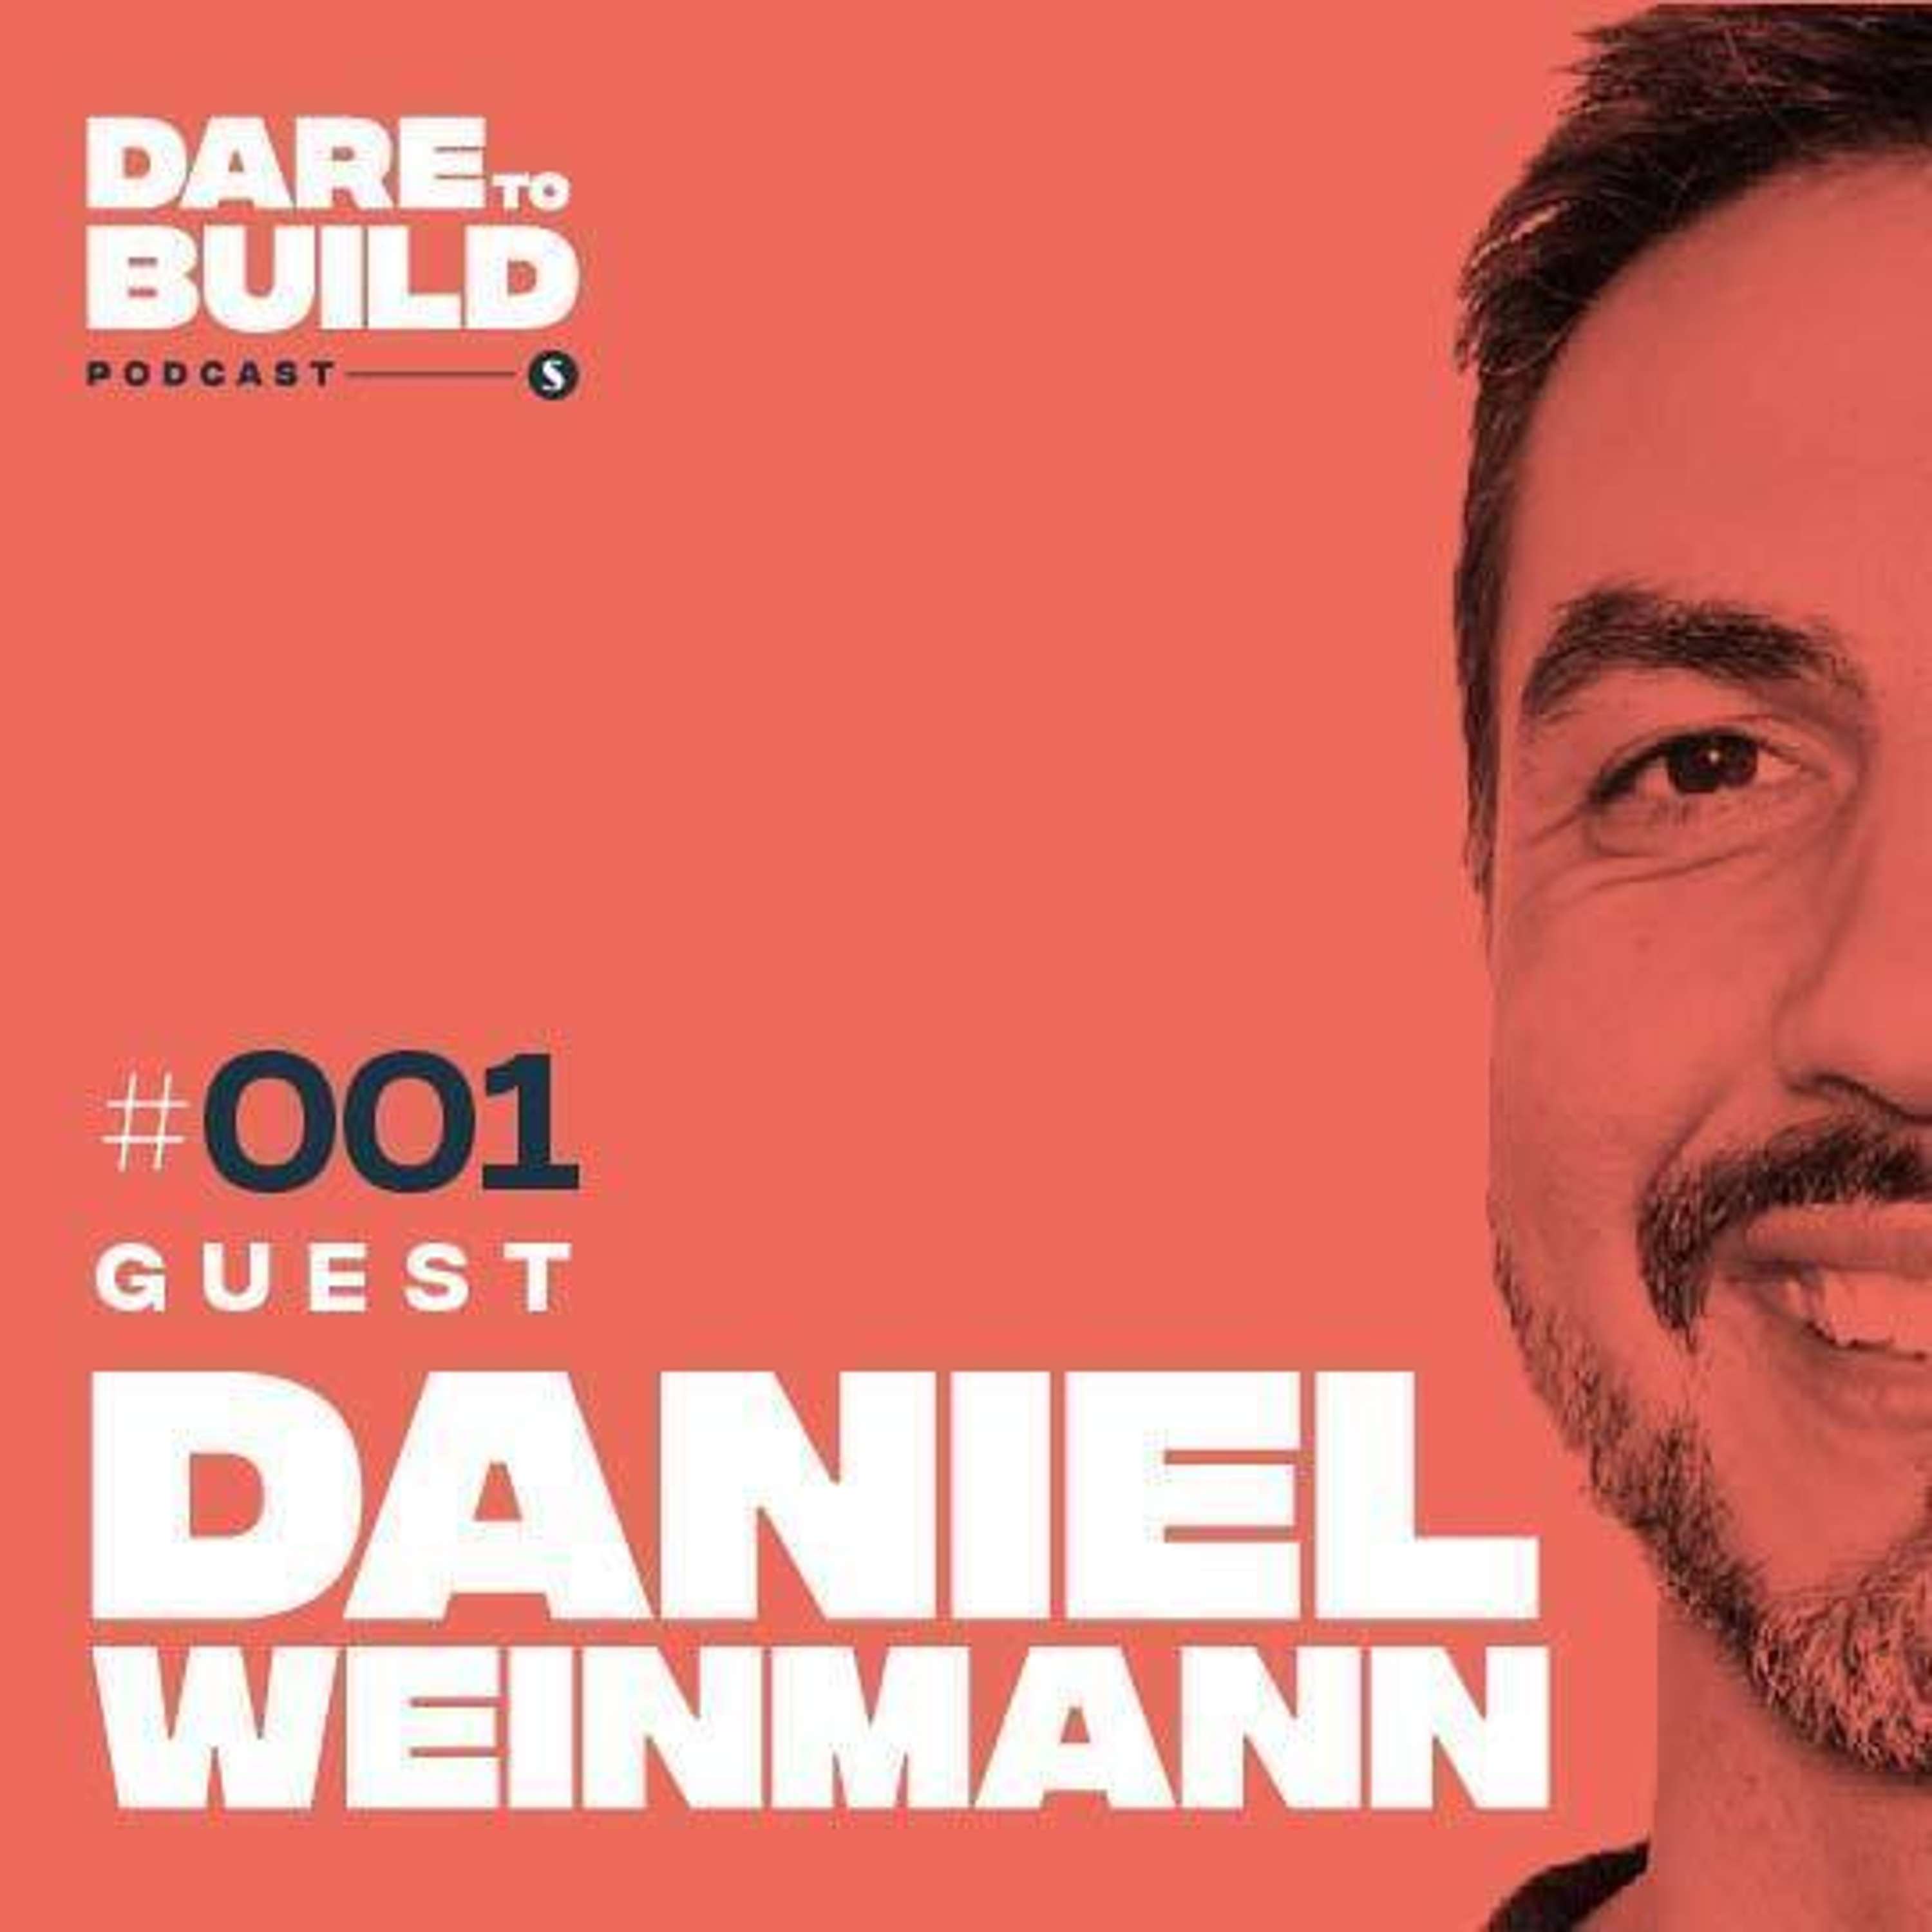 The builder: Daniel Weinmann, from Seasoned | EP#01 | Dare to Build, hosted by Rachel Miller